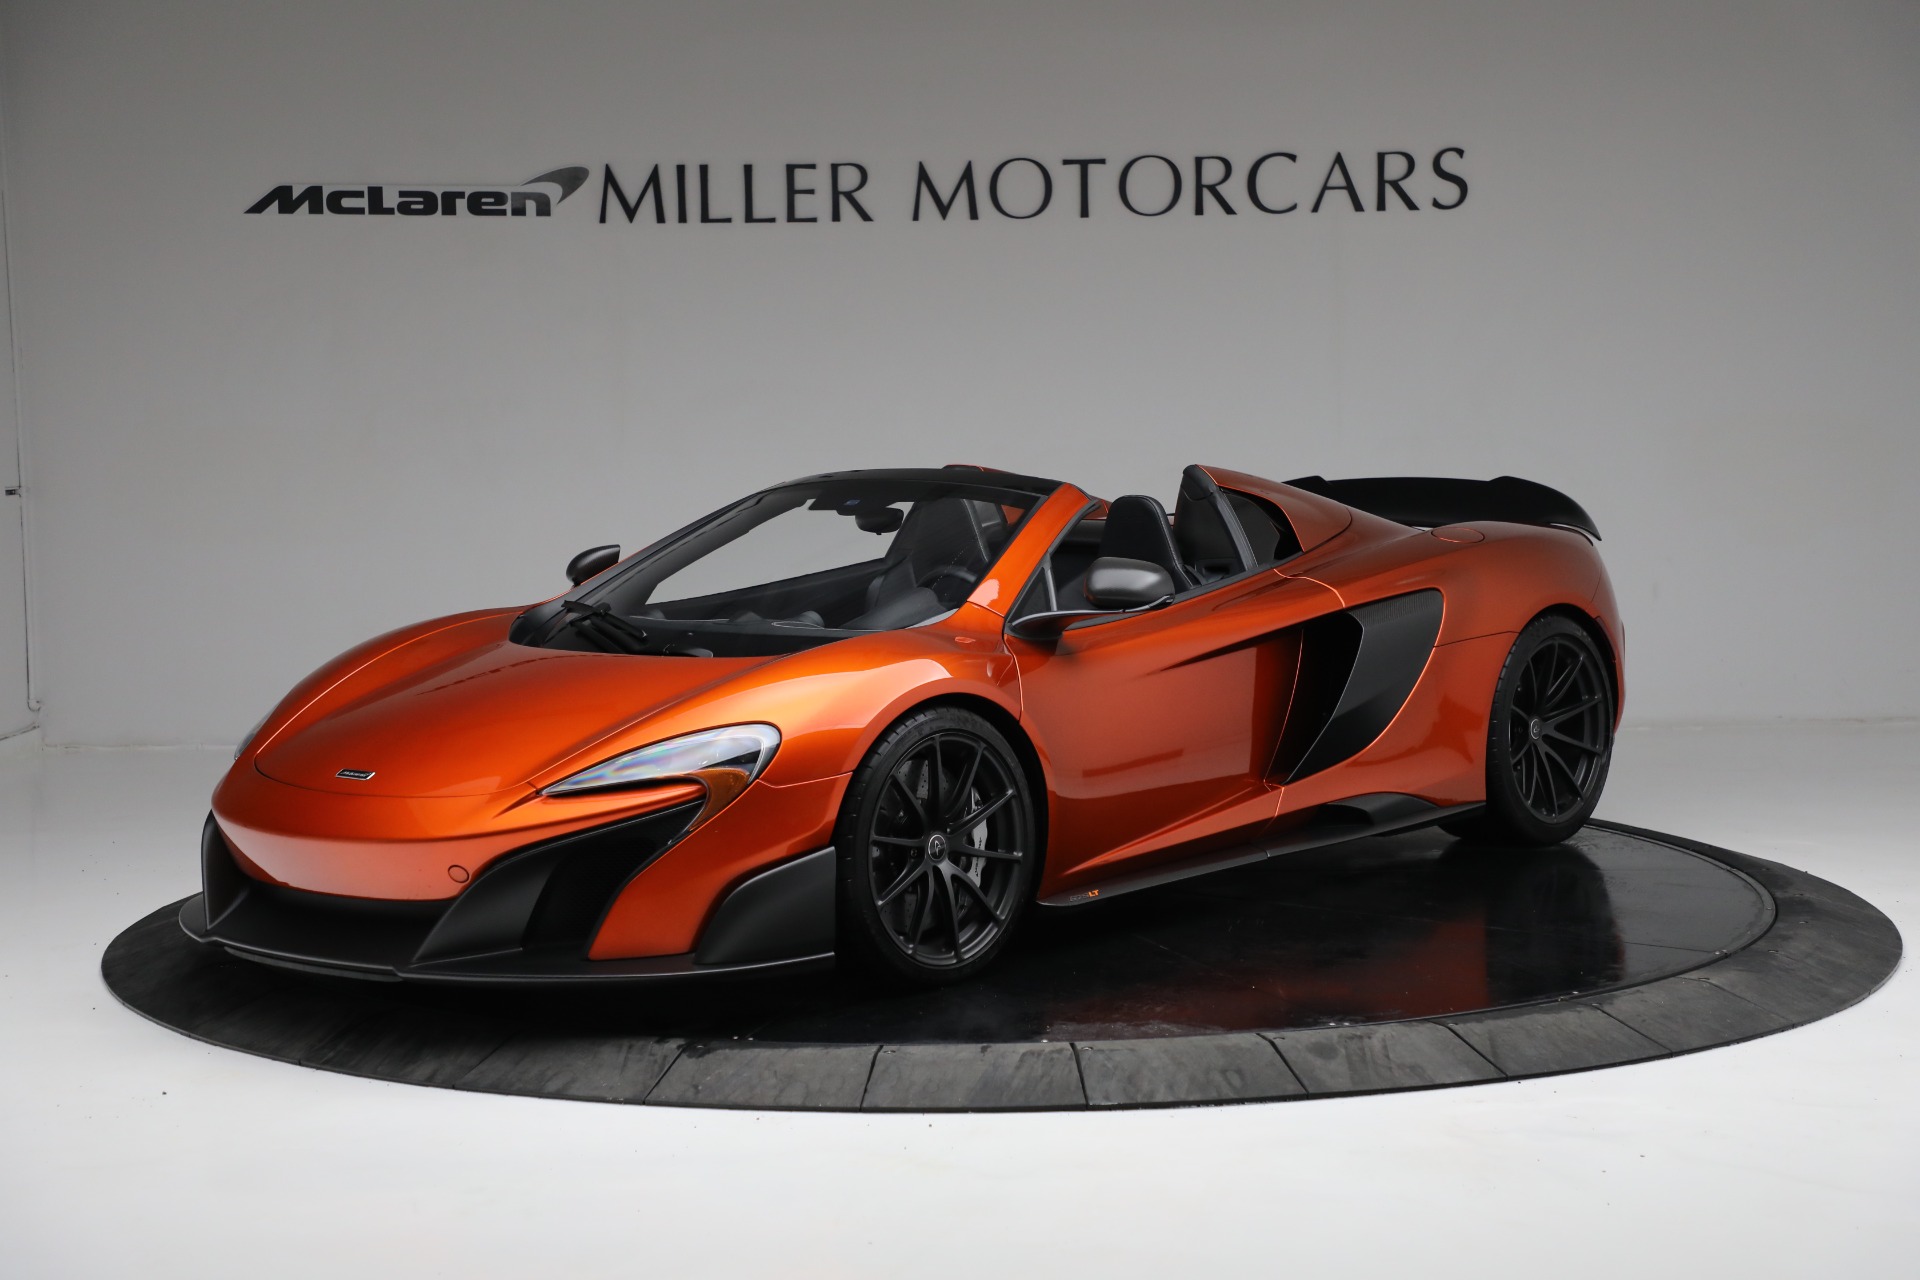 Used 2016 McLaren 675LT Spider for sale $284,900 at Bugatti of Greenwich in Greenwich CT 06830 1